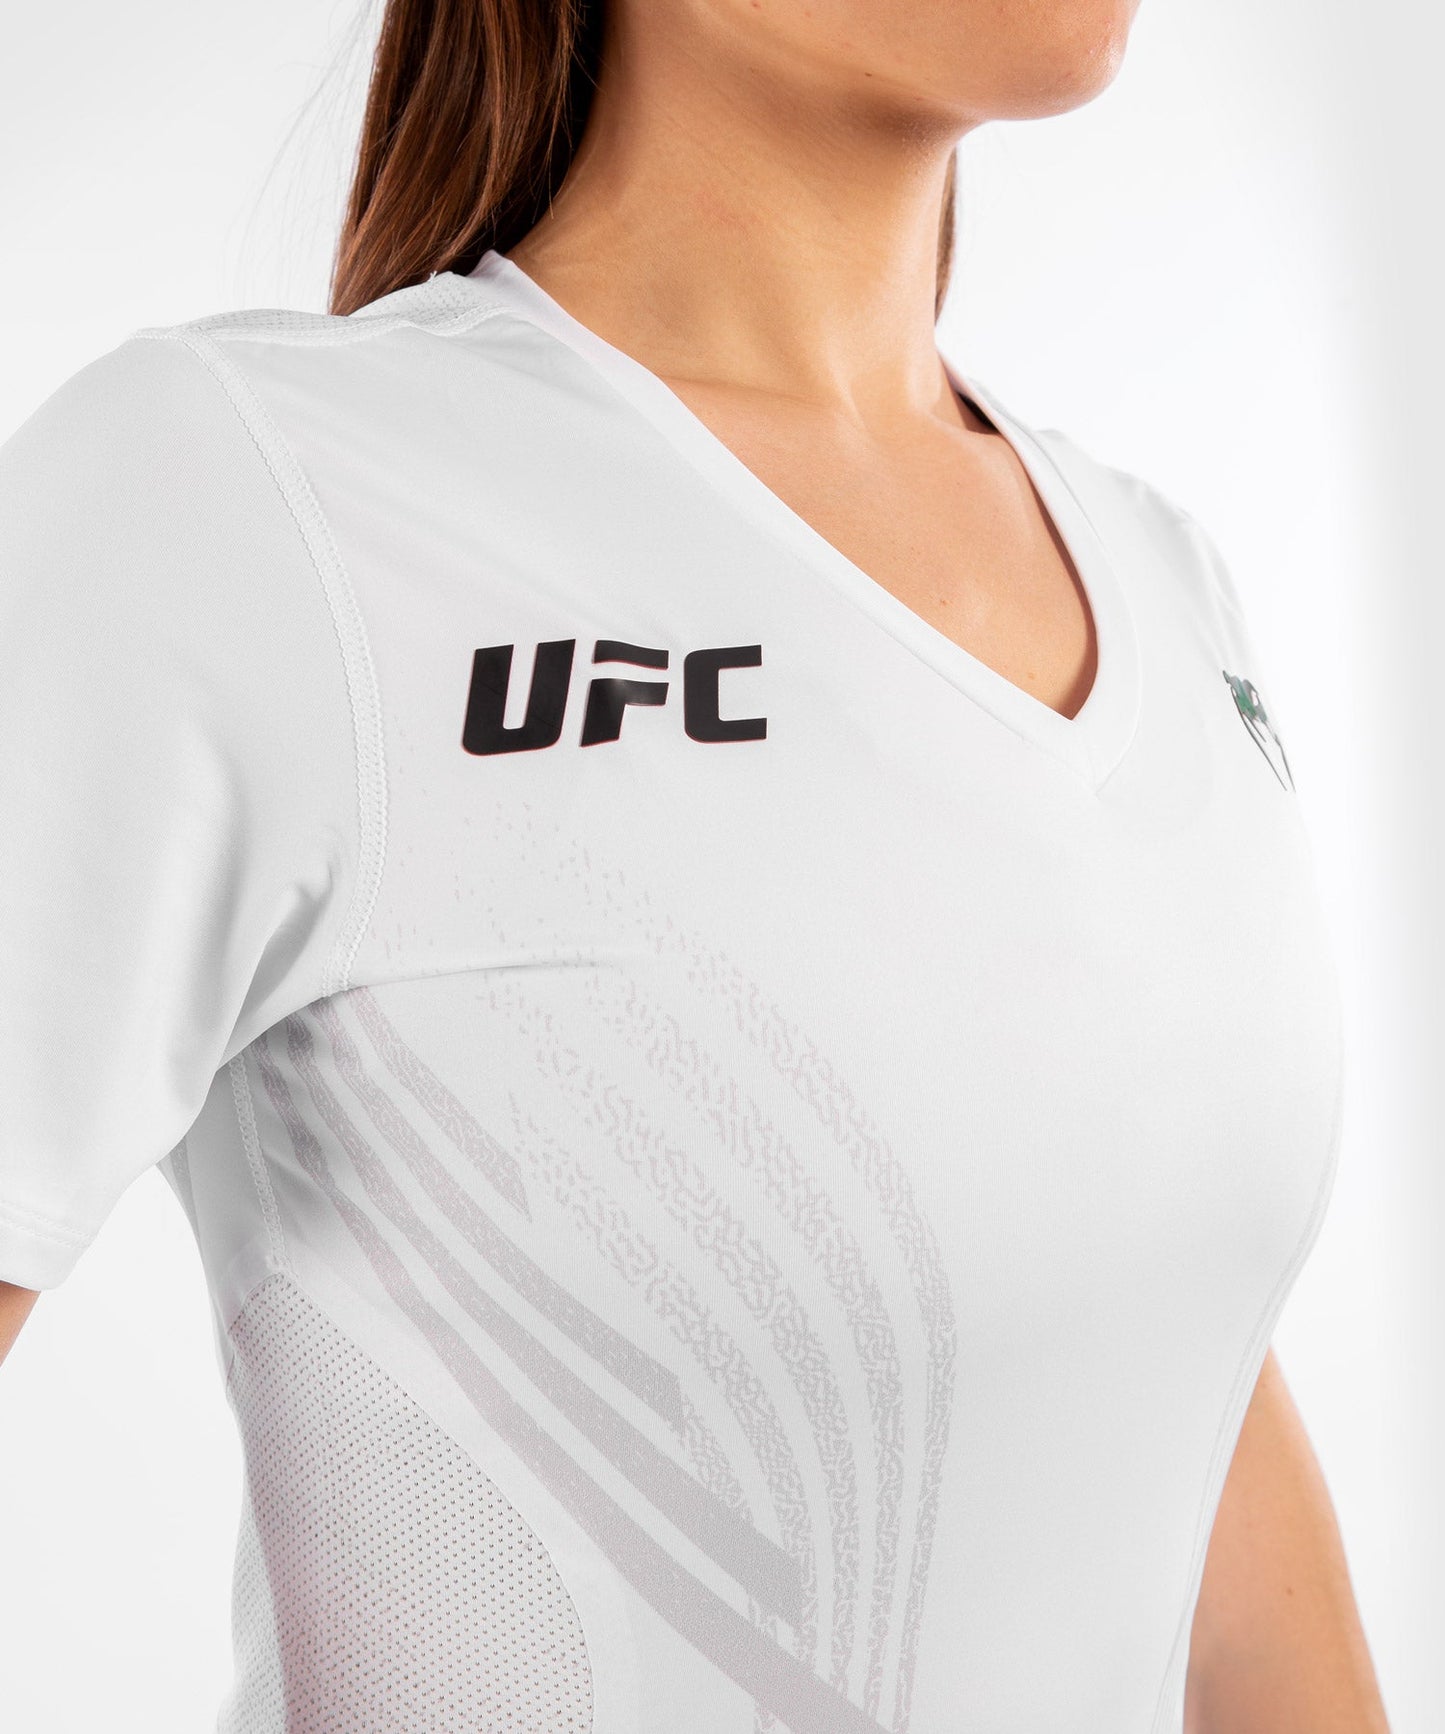 UFC Venum Fighters Authentic Fight Night Women's Walkout Jersey - White